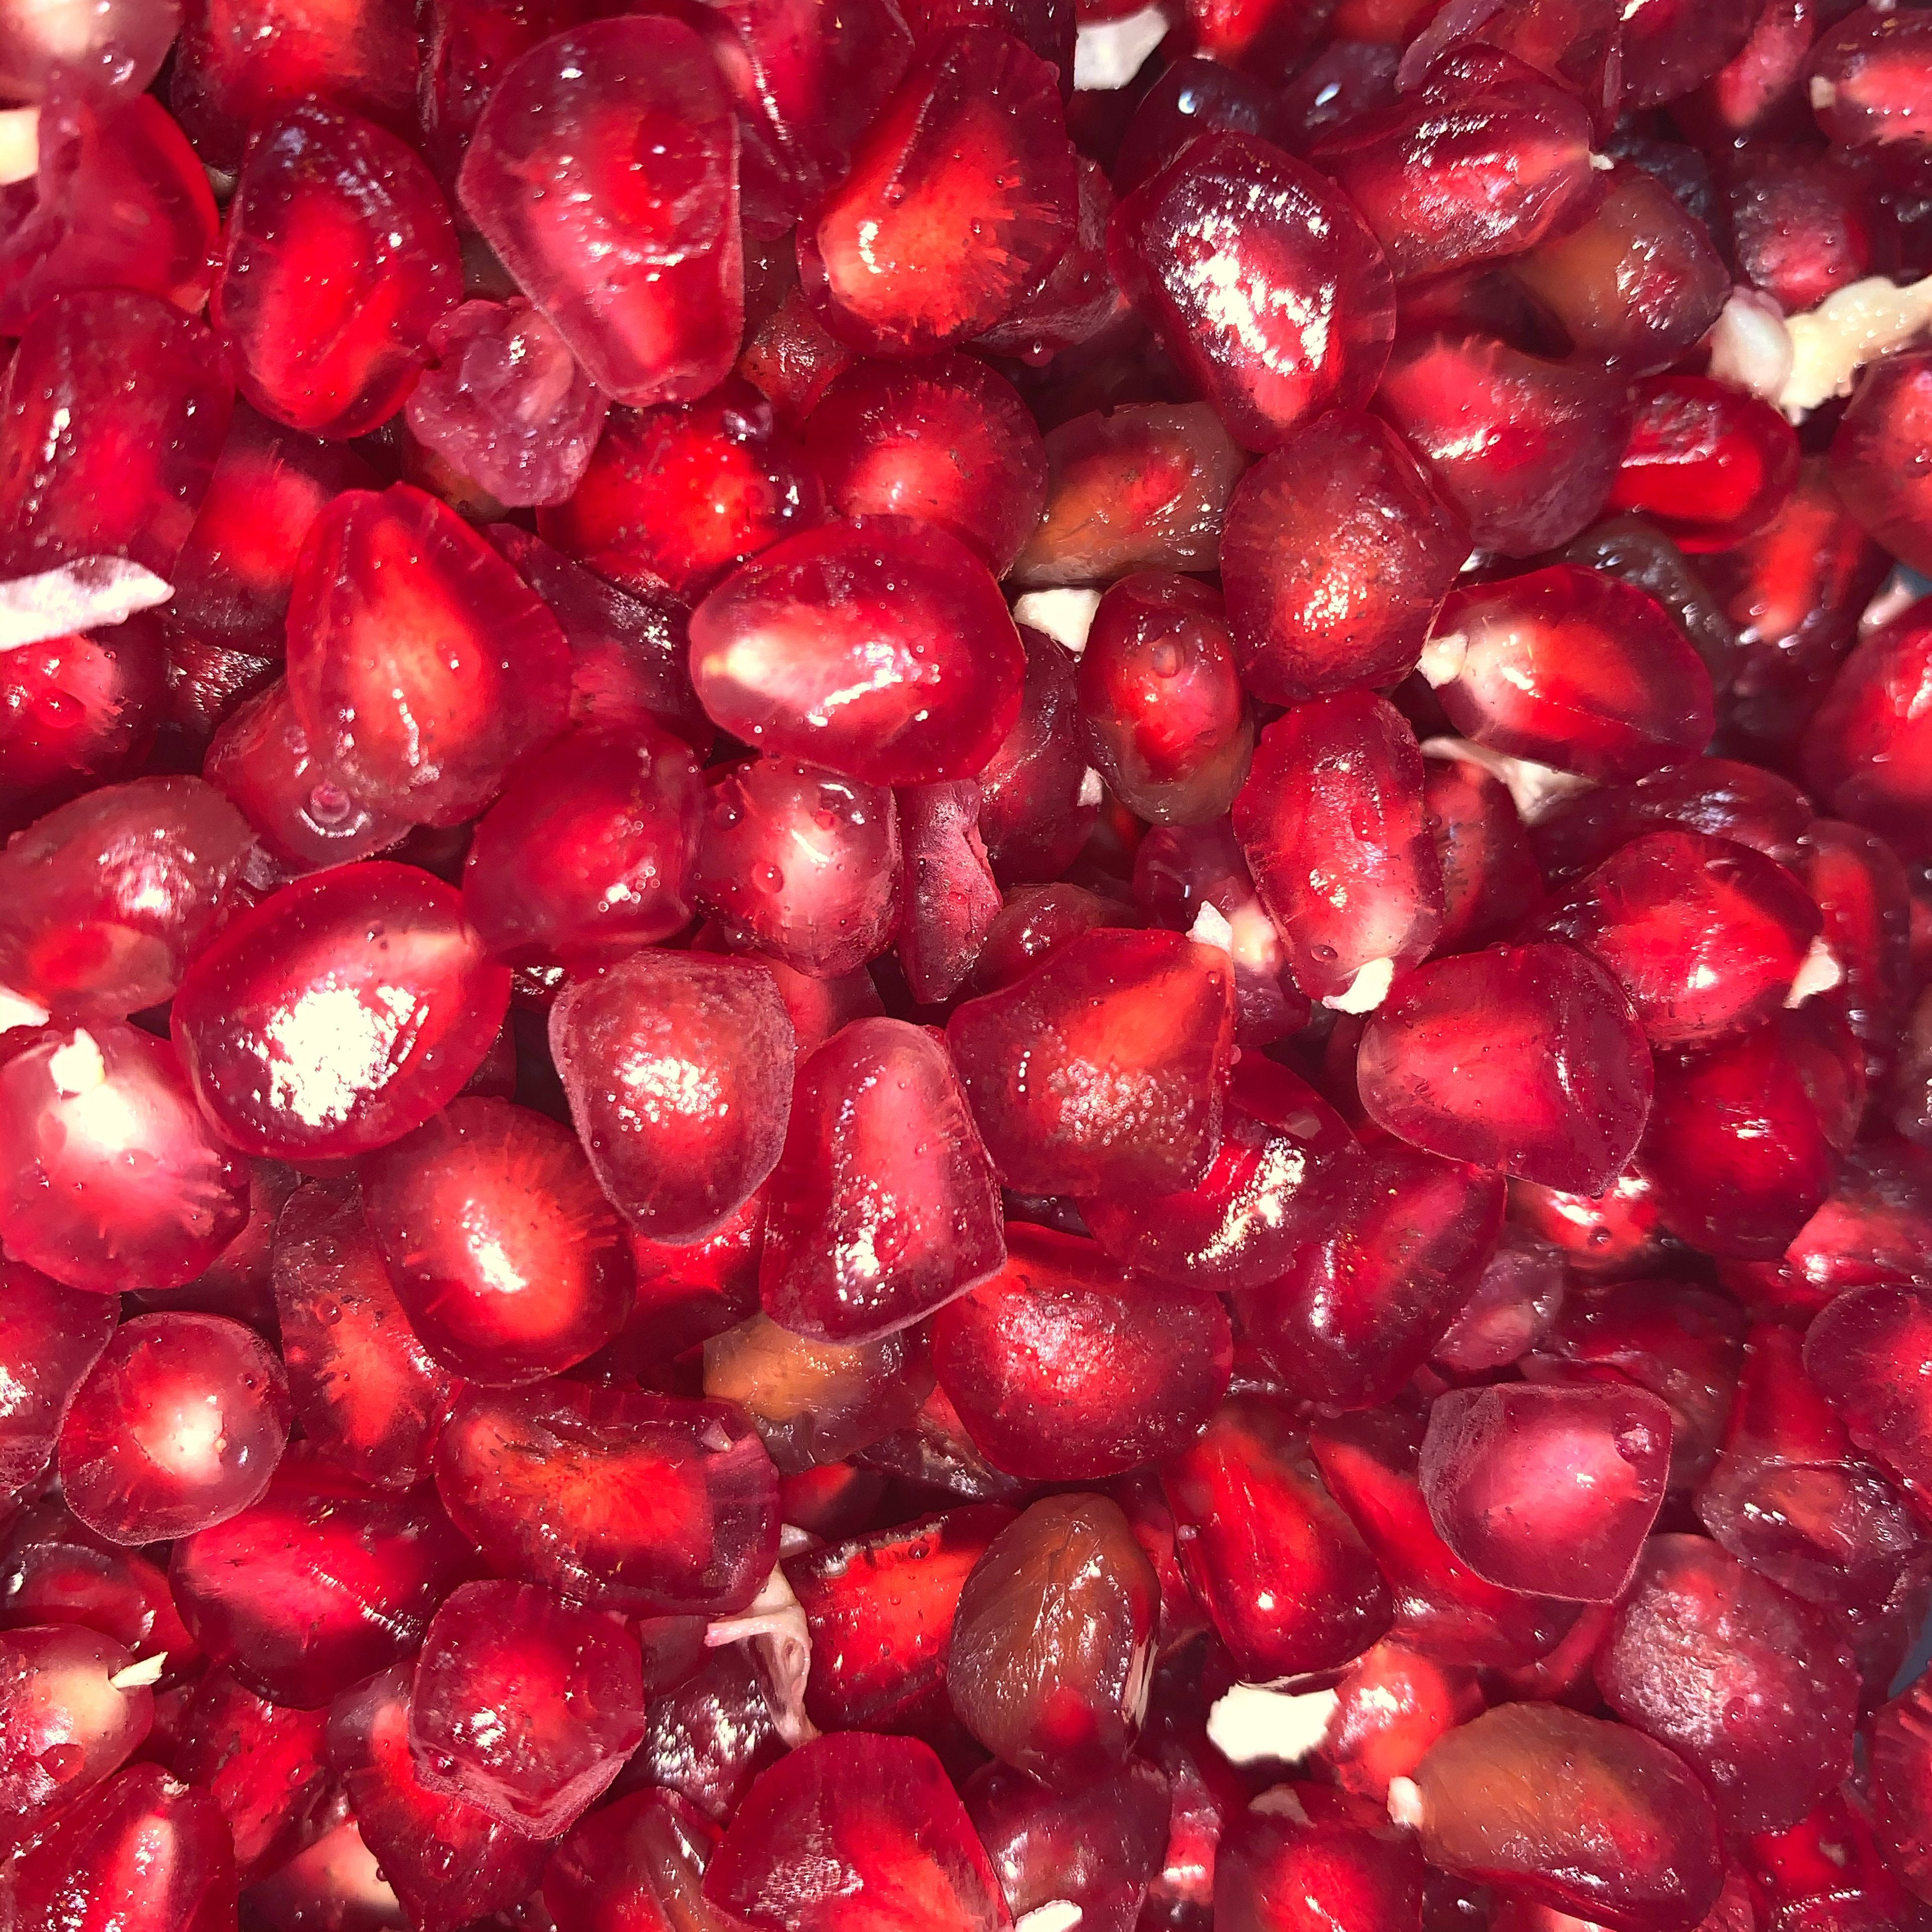 Cut the pomegranate and de-seed them.